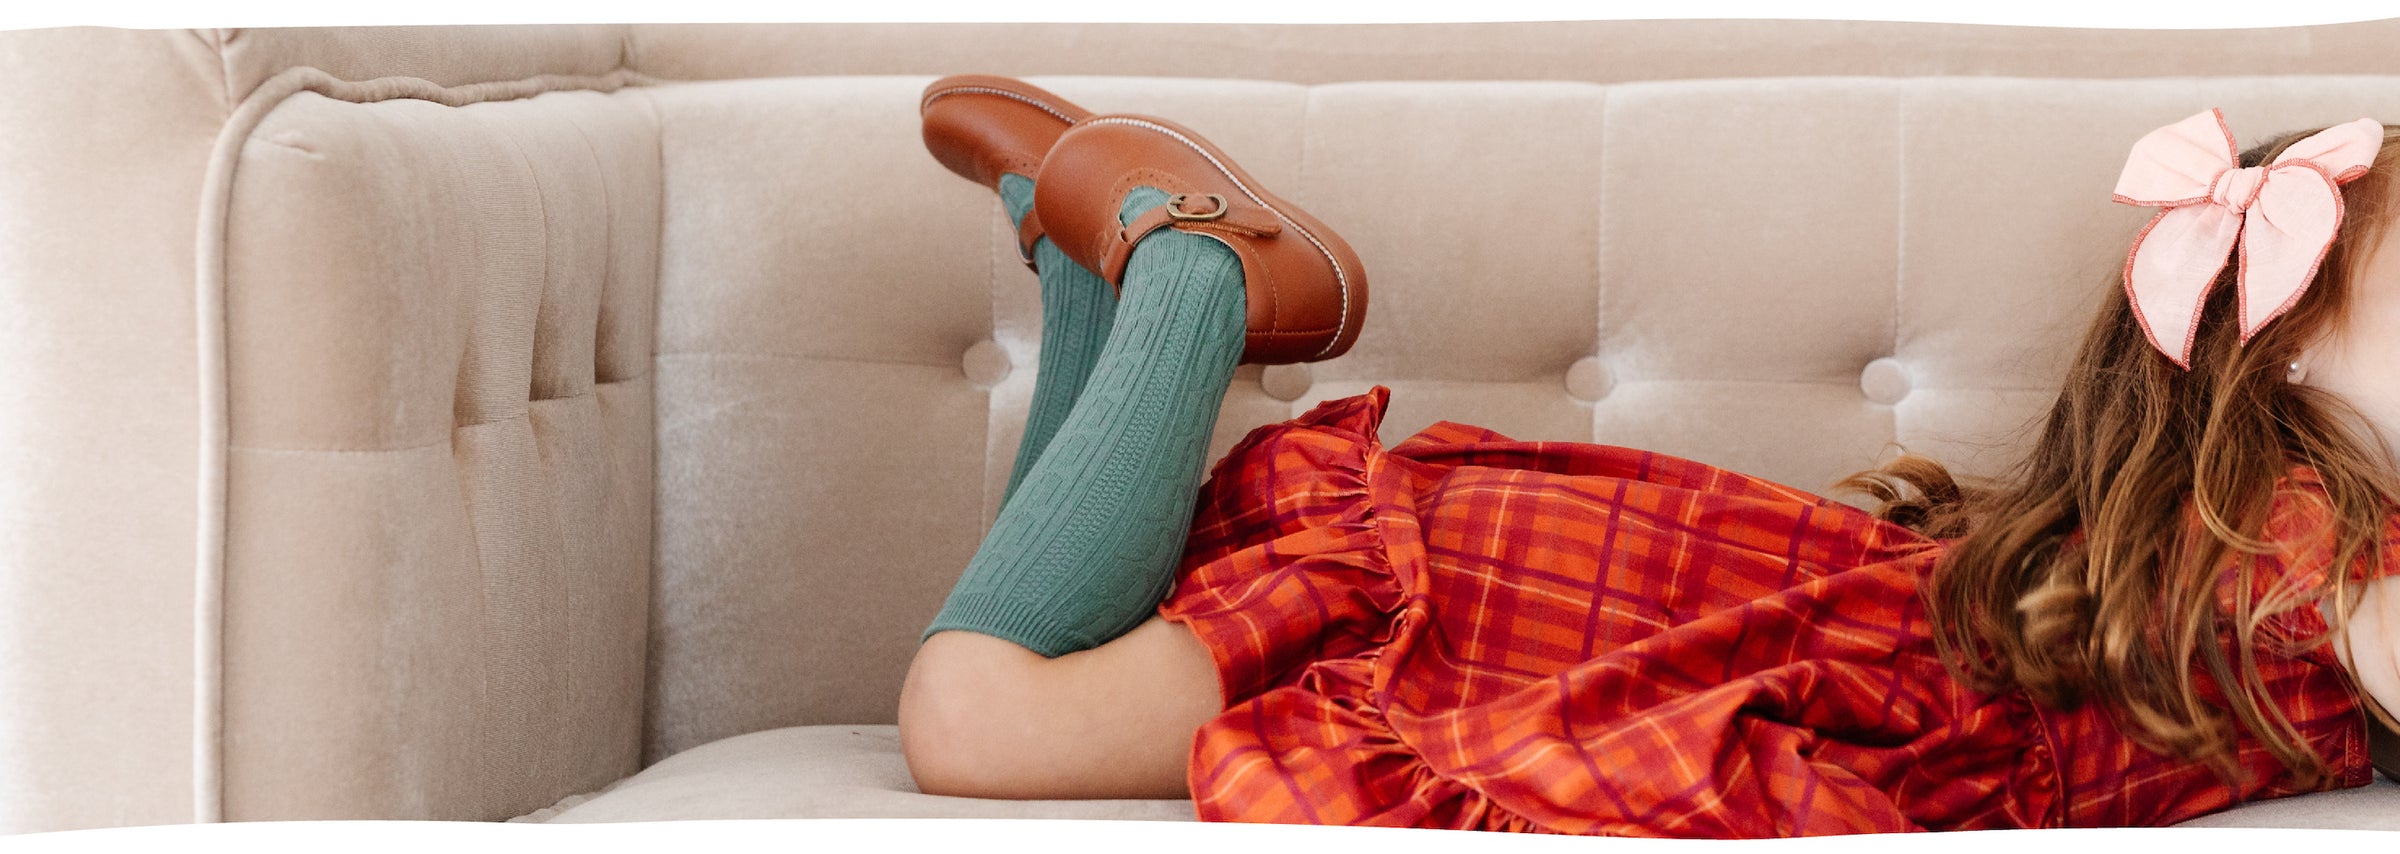 little girl on couch wearing cable knit knee high socks in teal and orange plaid twirl dress